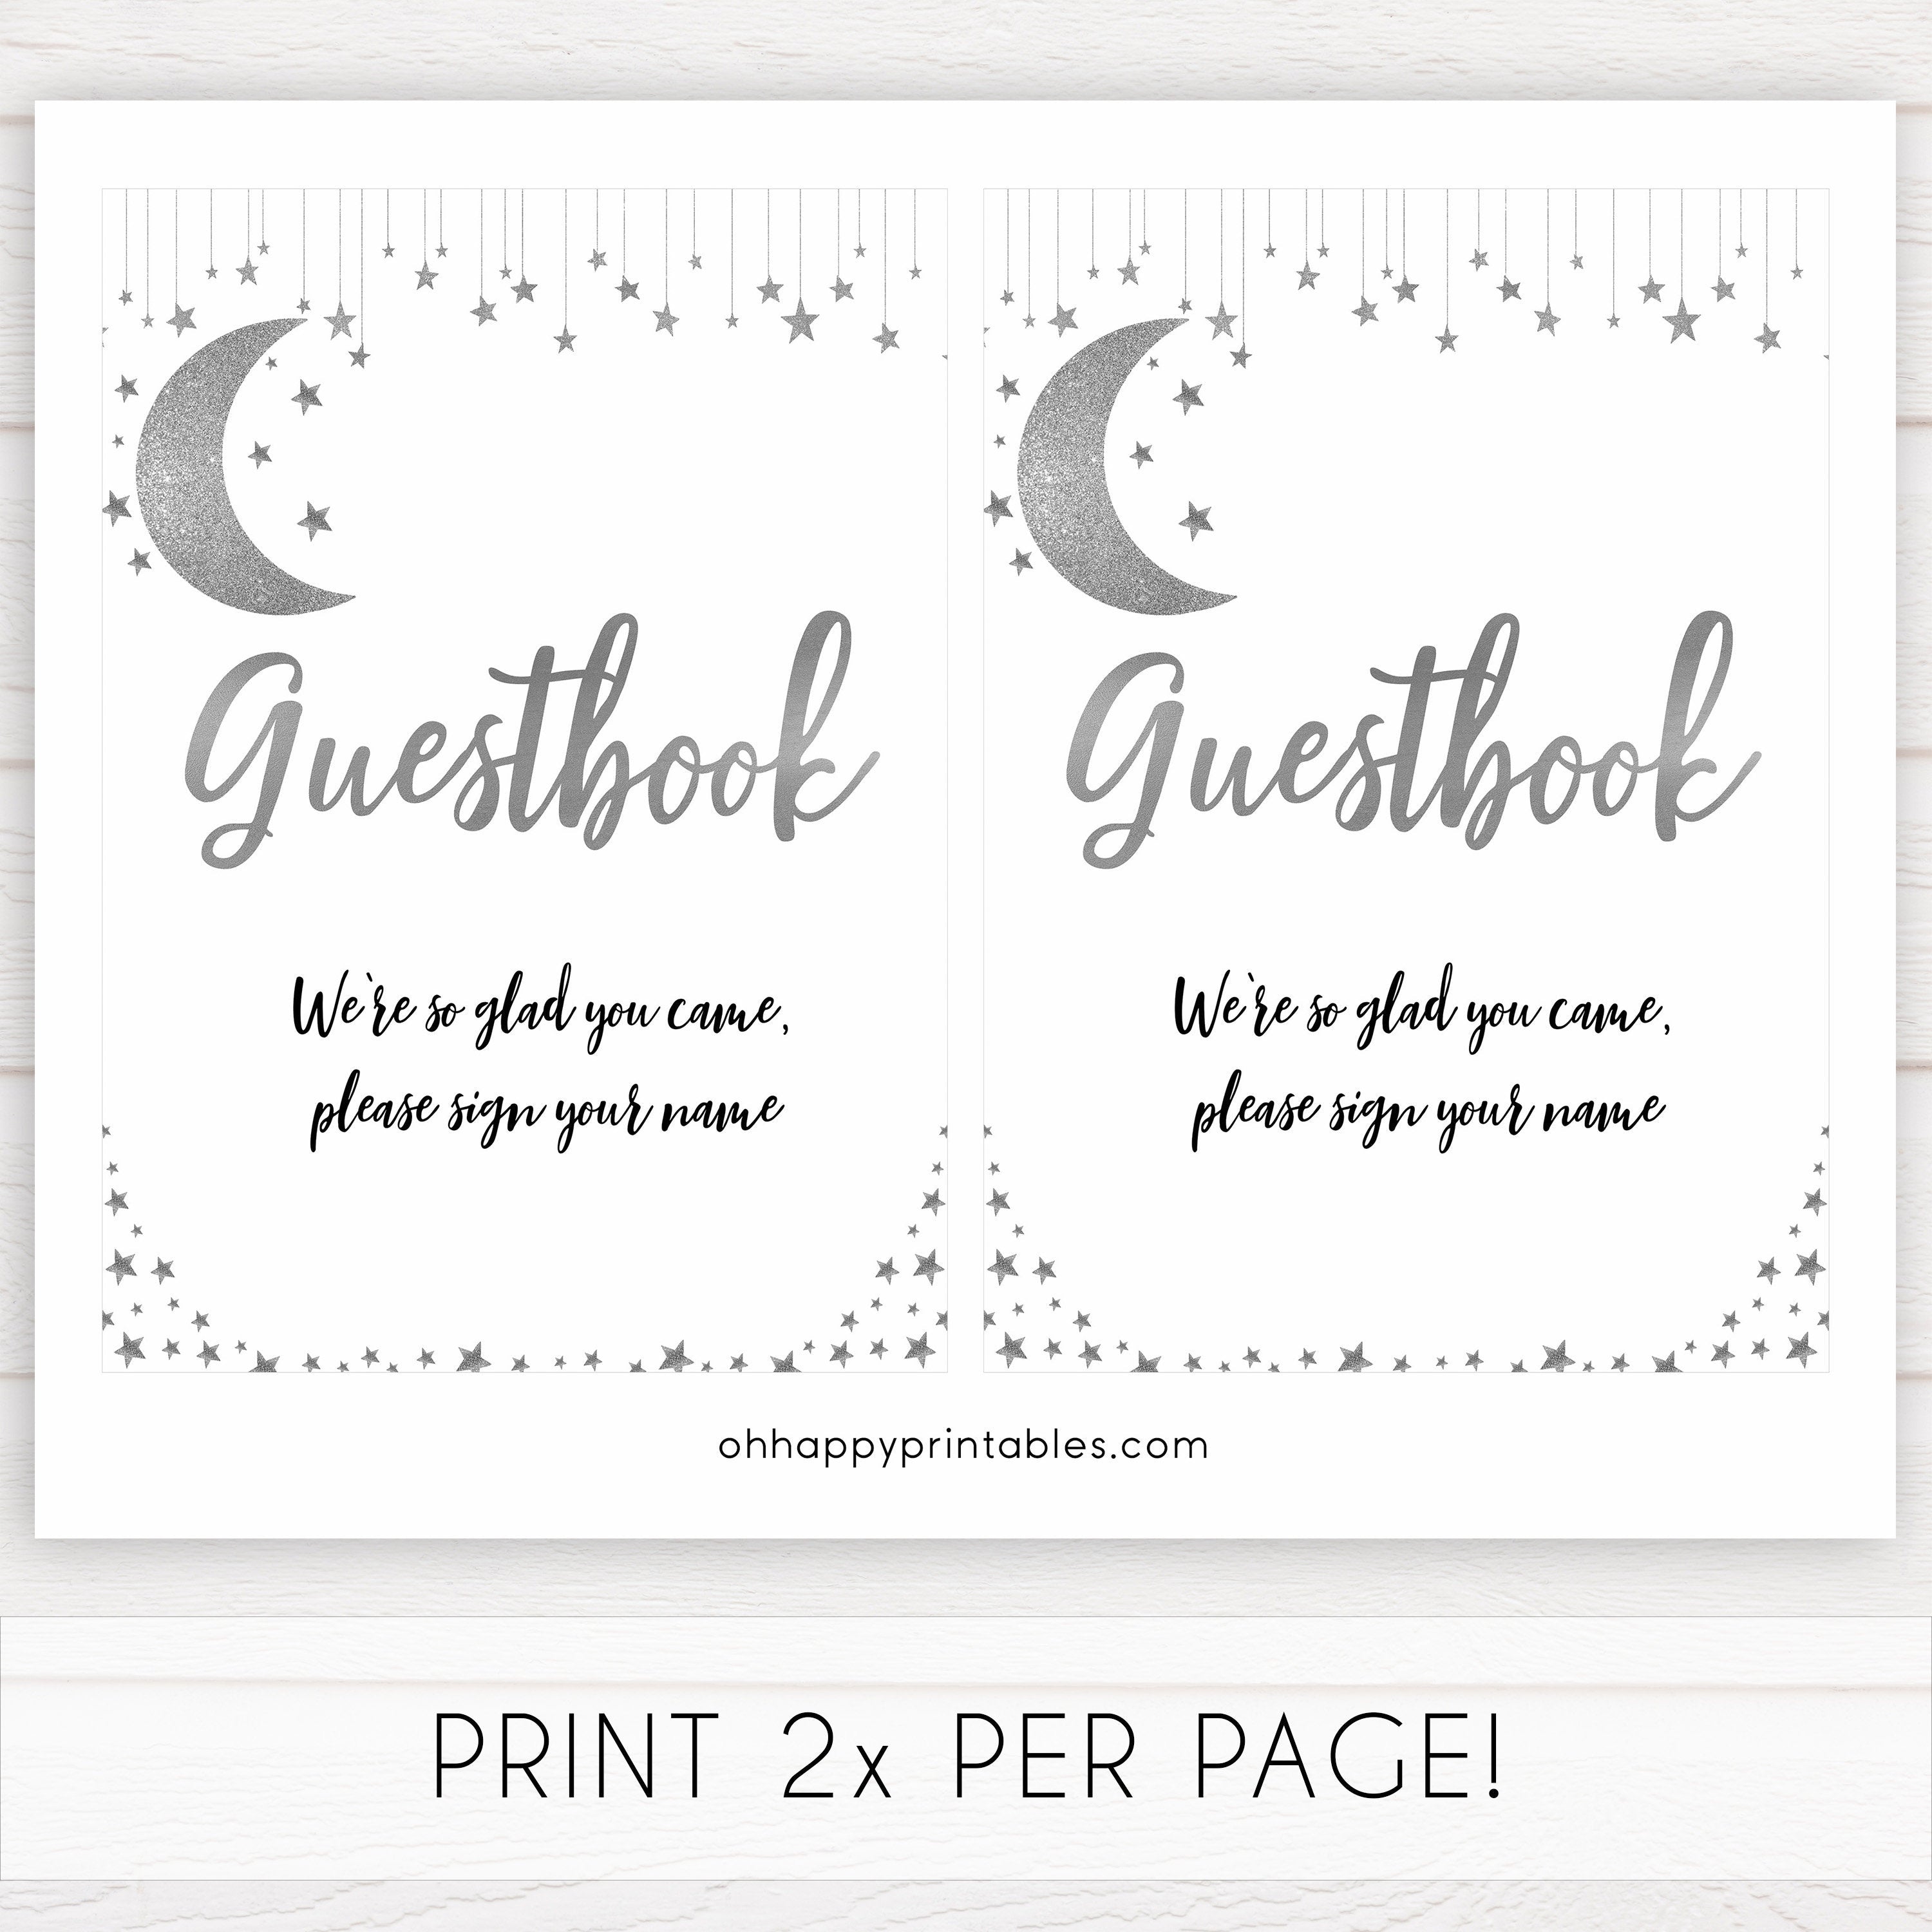 Guestbook baby sign, Little star baby signs, printable baby signs, printable baby decor, twinkle baby shower, star baby decor, fun baby shower ideas, top baby shower themes